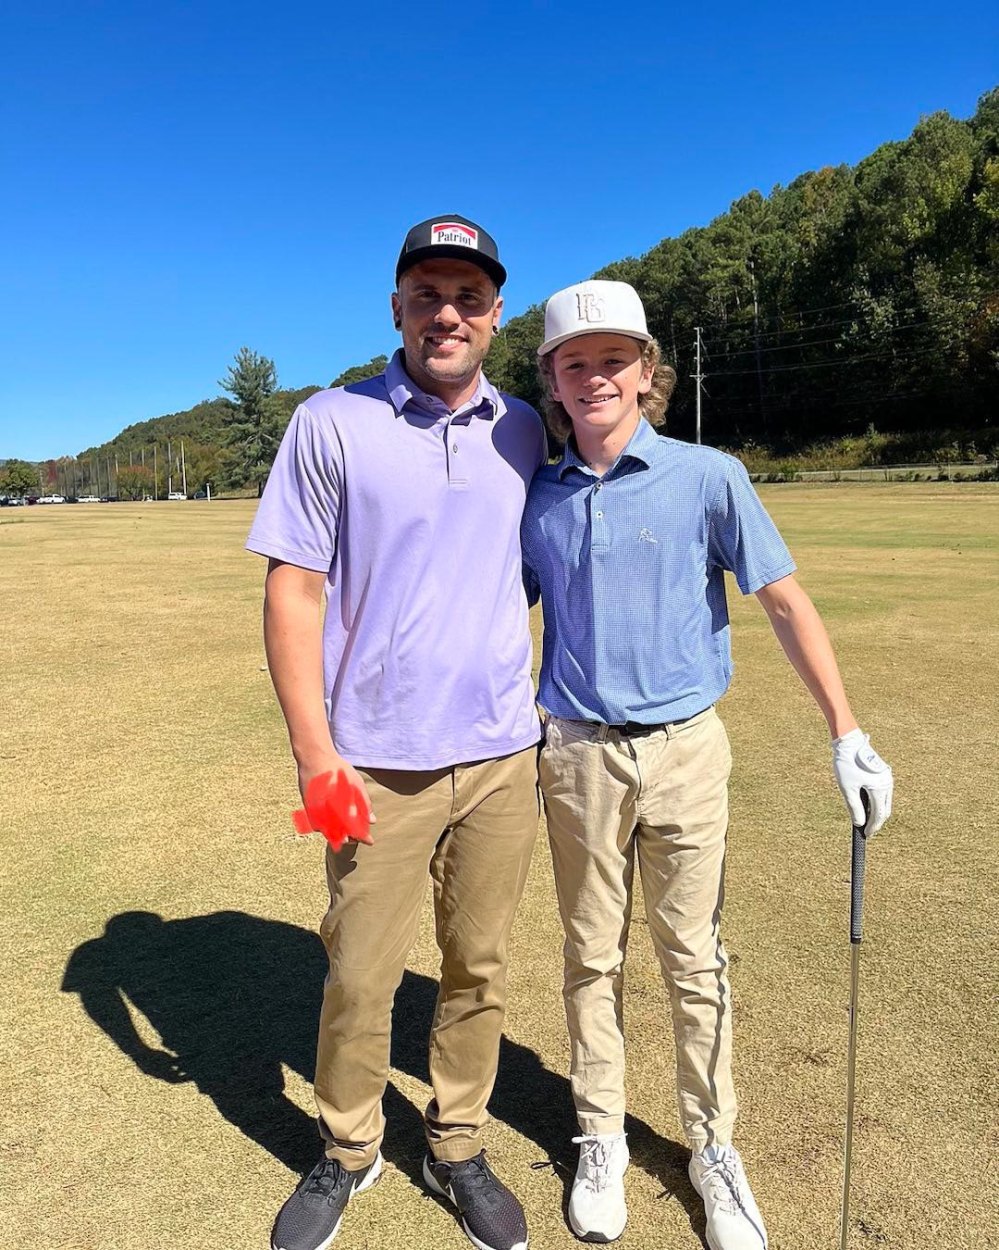 Teen Mom s Ryan Edwards Golfs With Son Bentley as They Continue to Rebuild Relationship After Drama 358